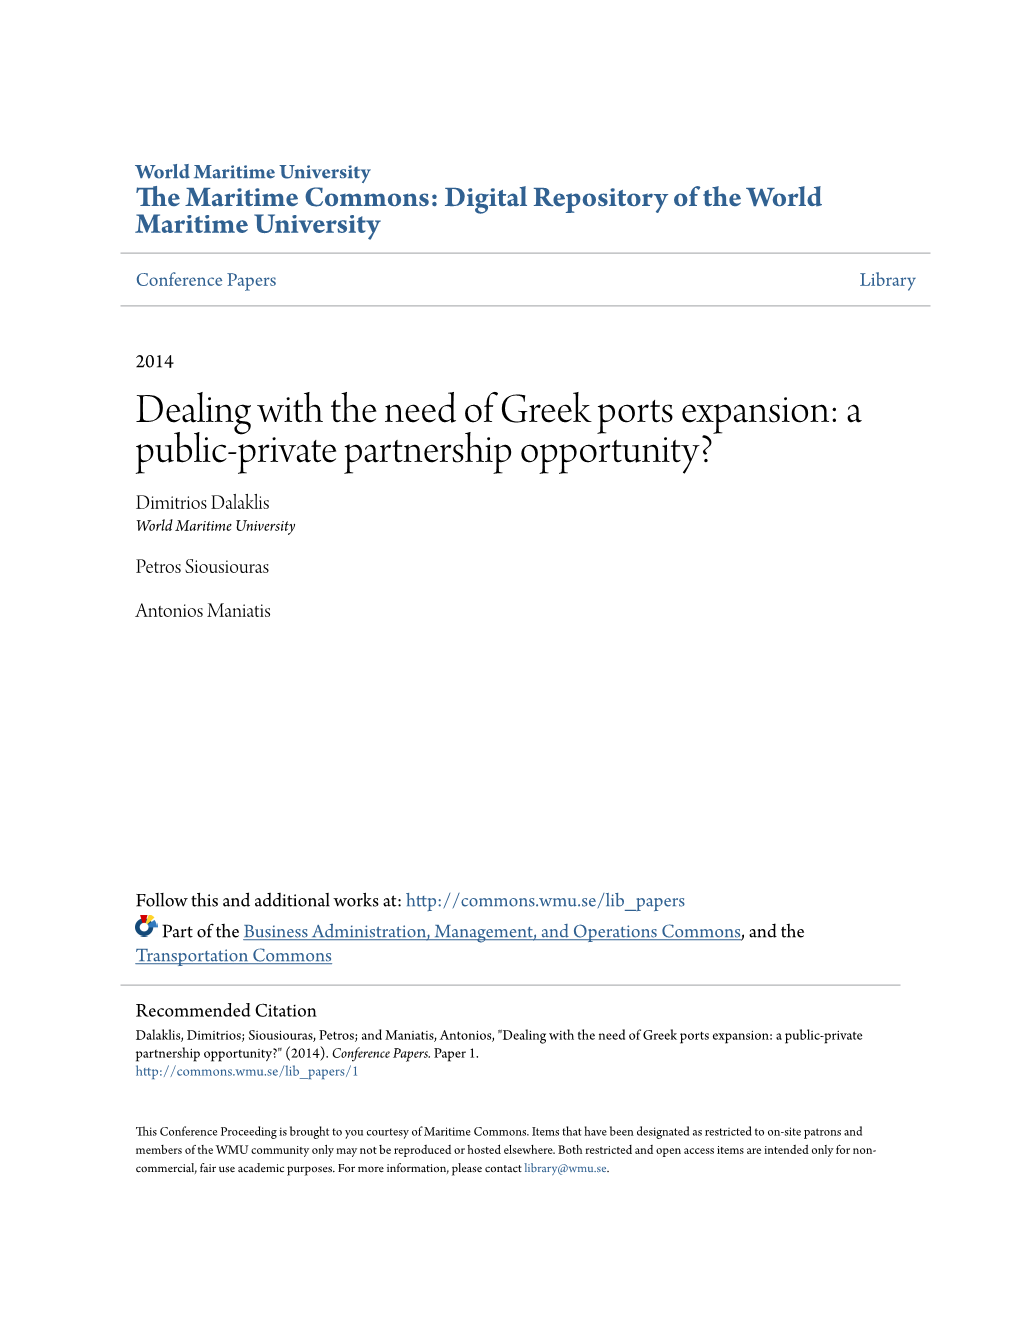 Dealing with the Need of Greek Ports Expansion: a Public-Private Partnership Opportunity? Dimitrios Dalaklis World Maritime University